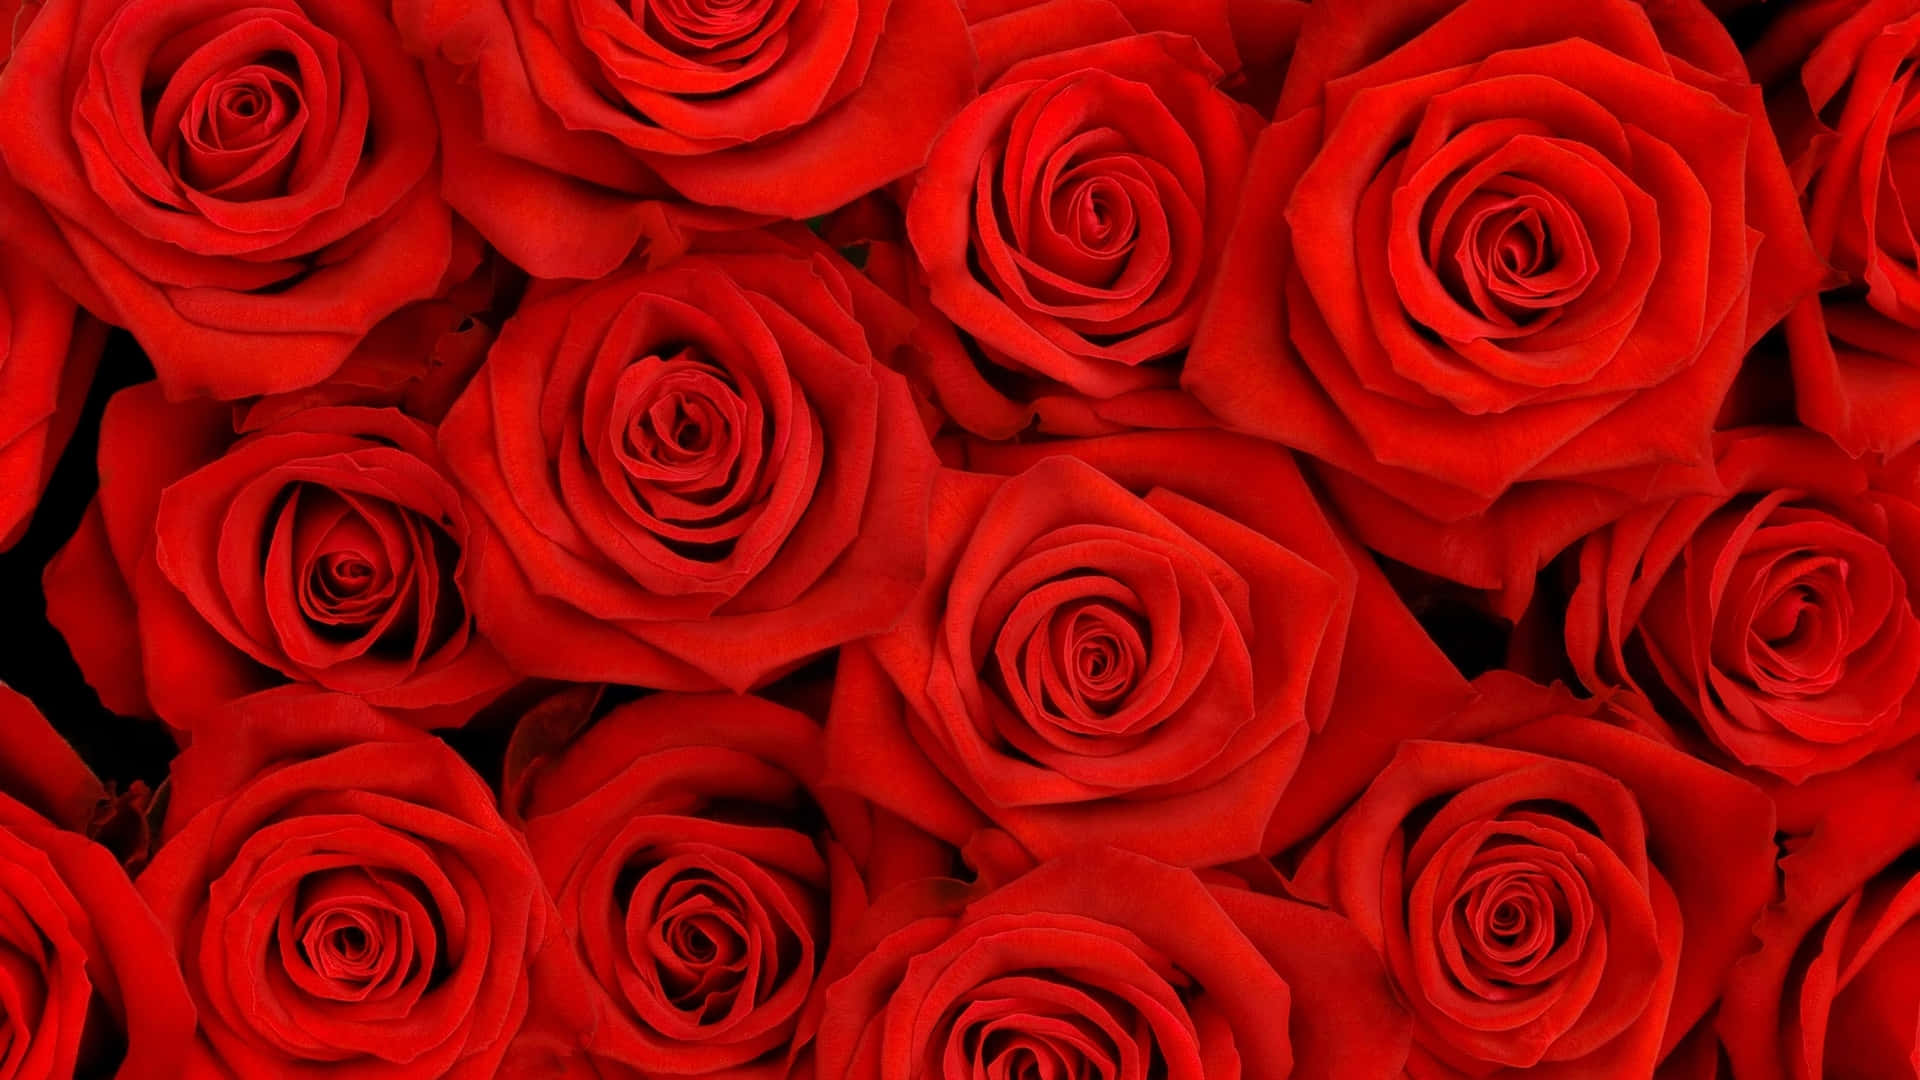 A bouquet of vibrant red roses. Wallpaper